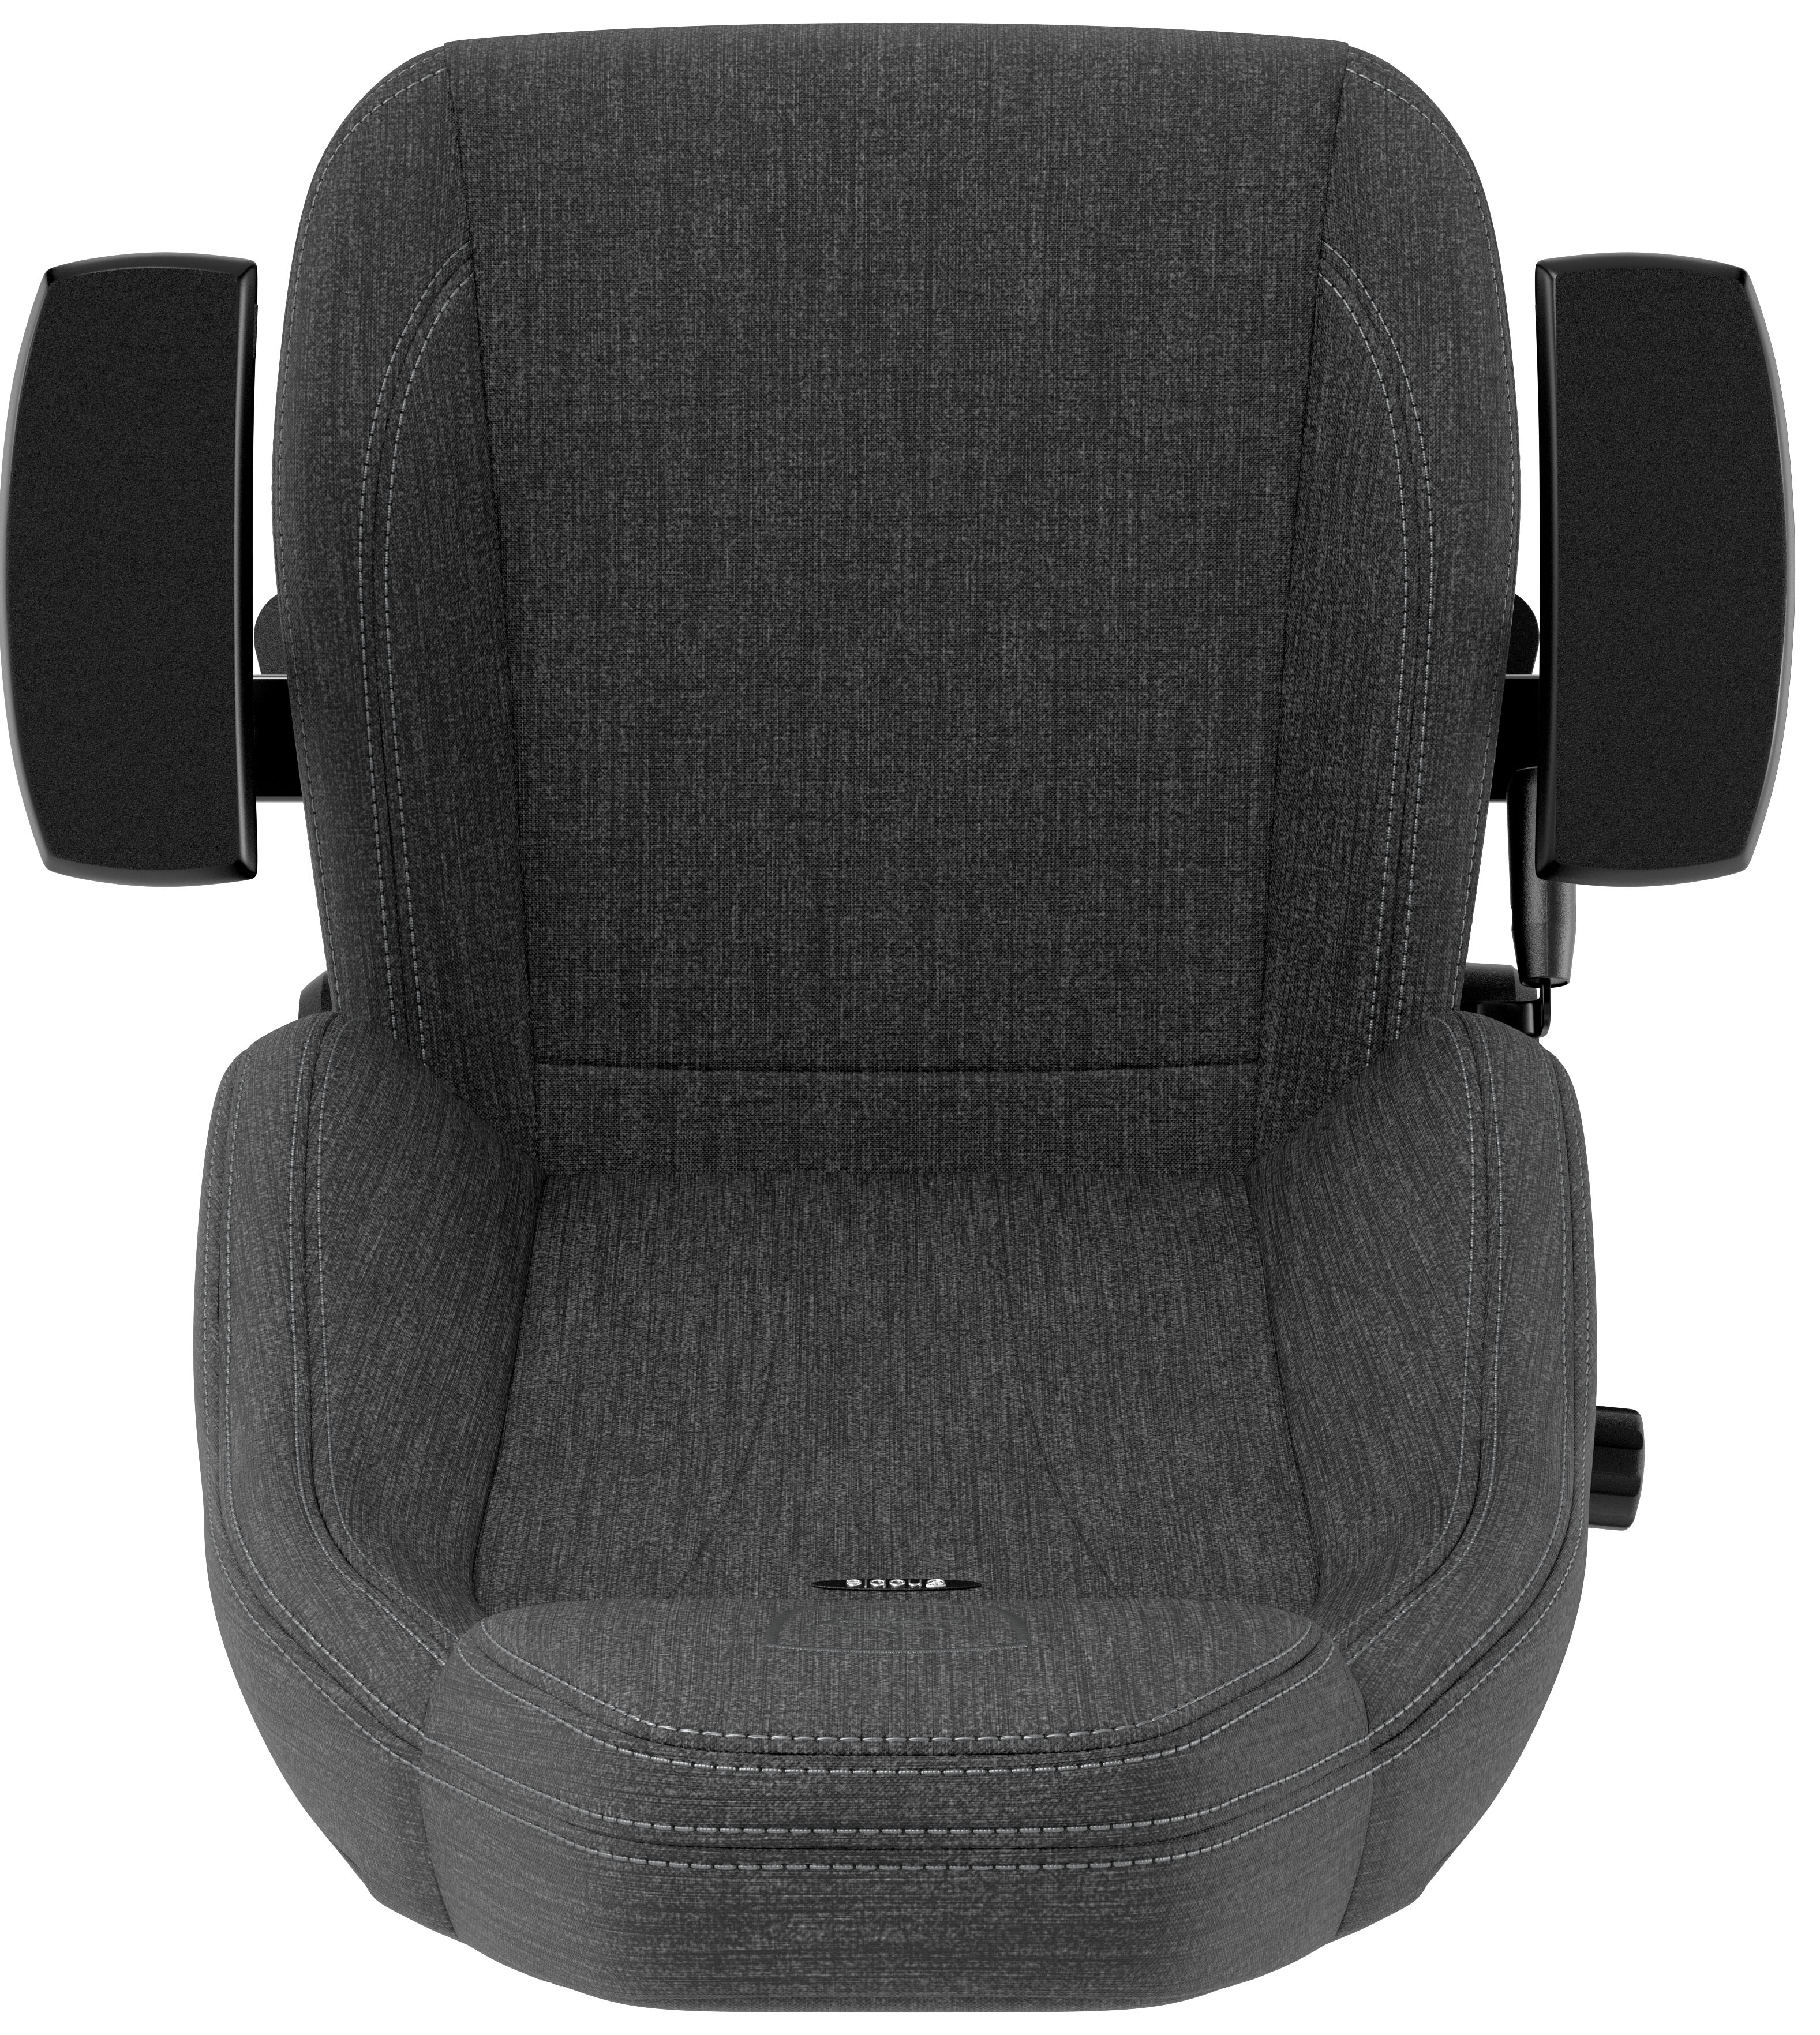 noblechairs - Cadeira noblechairs LEGEND TX - Fabric Edition Anthracite